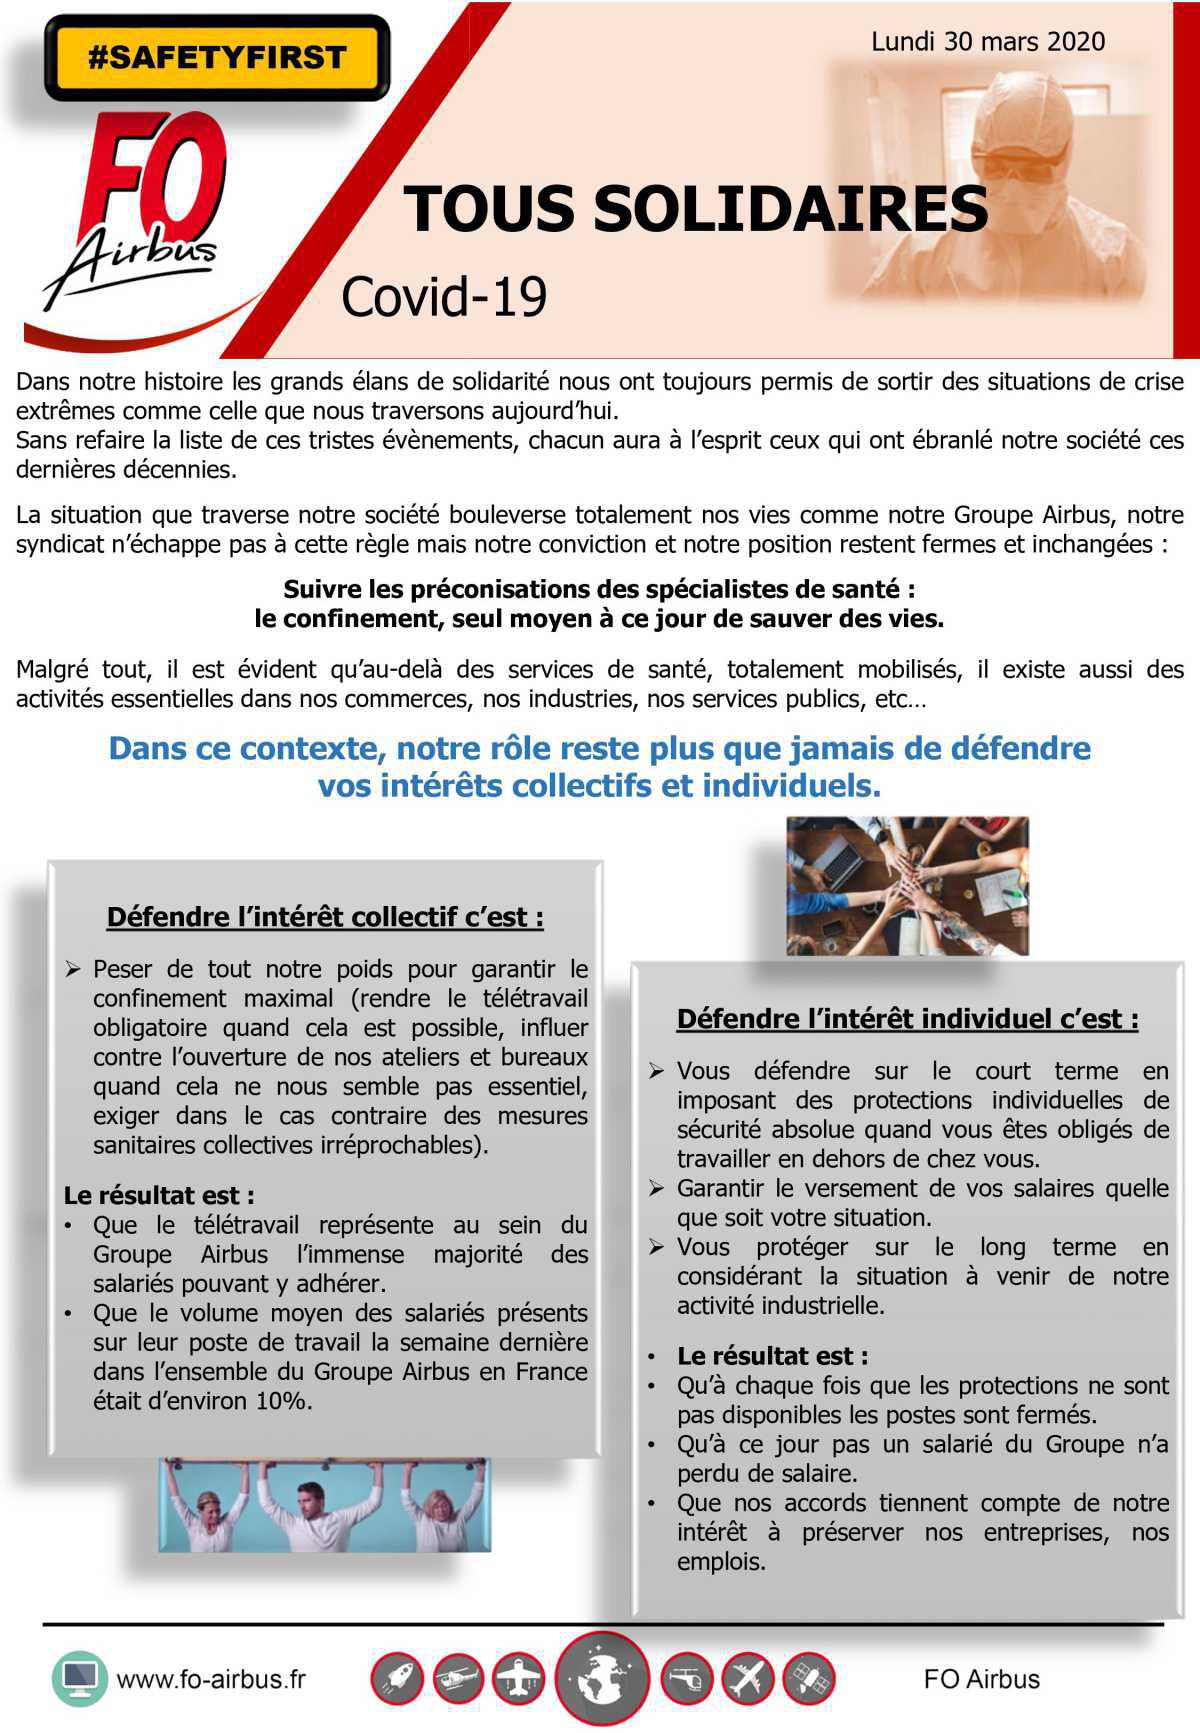 covid_19 : Tous solidaires